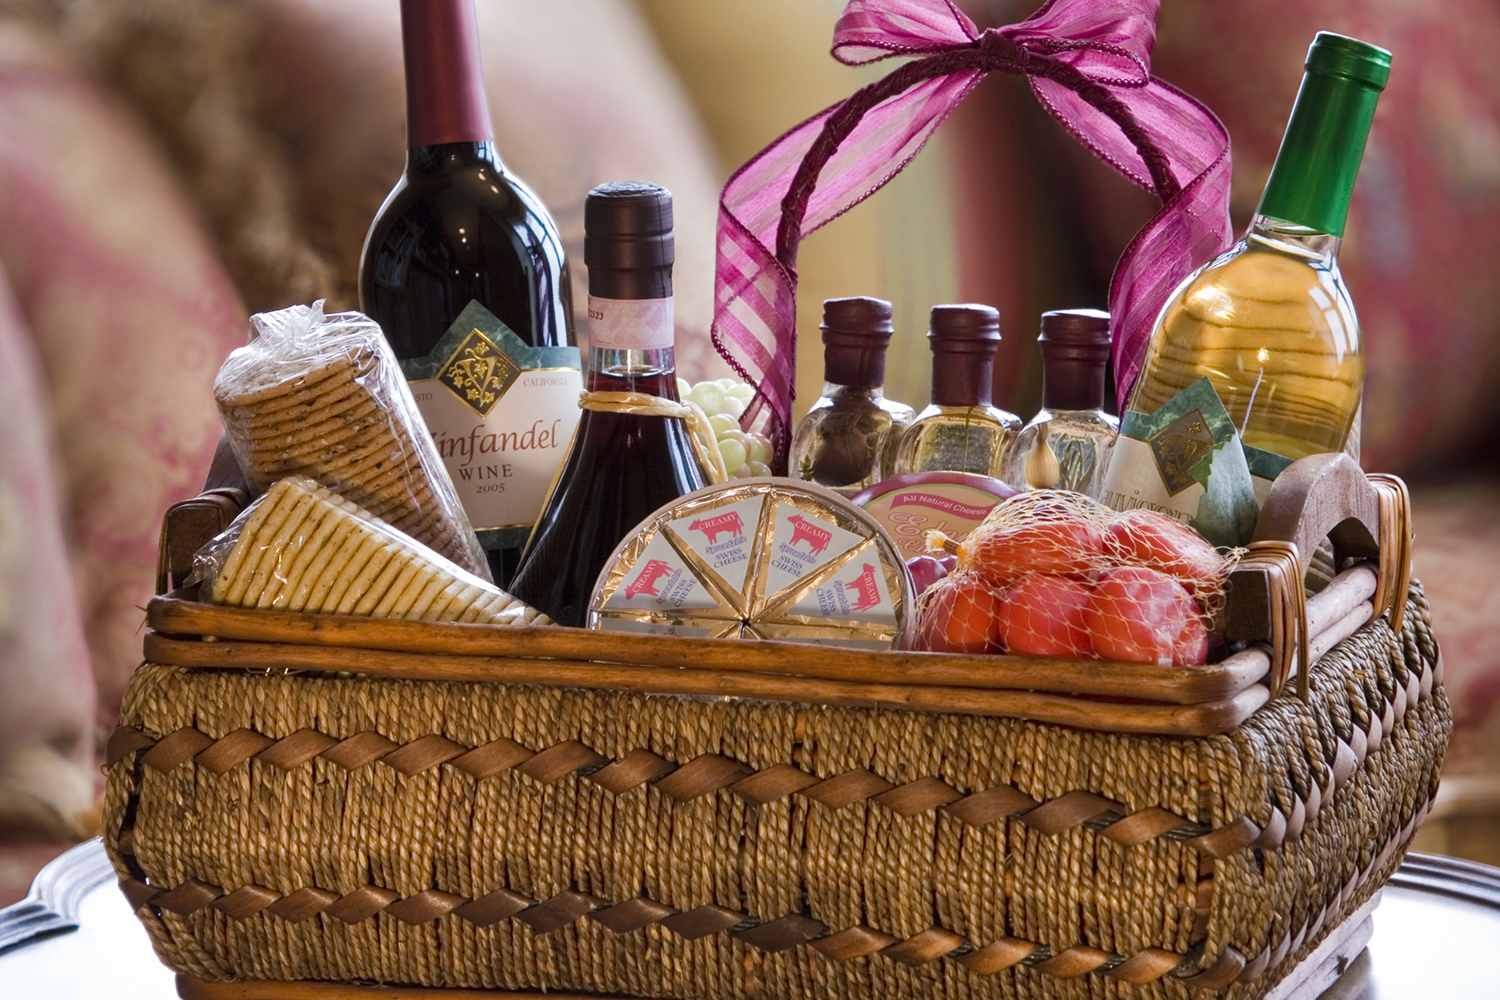 How to Build the Ultimate Natural Wine Gift Basket?